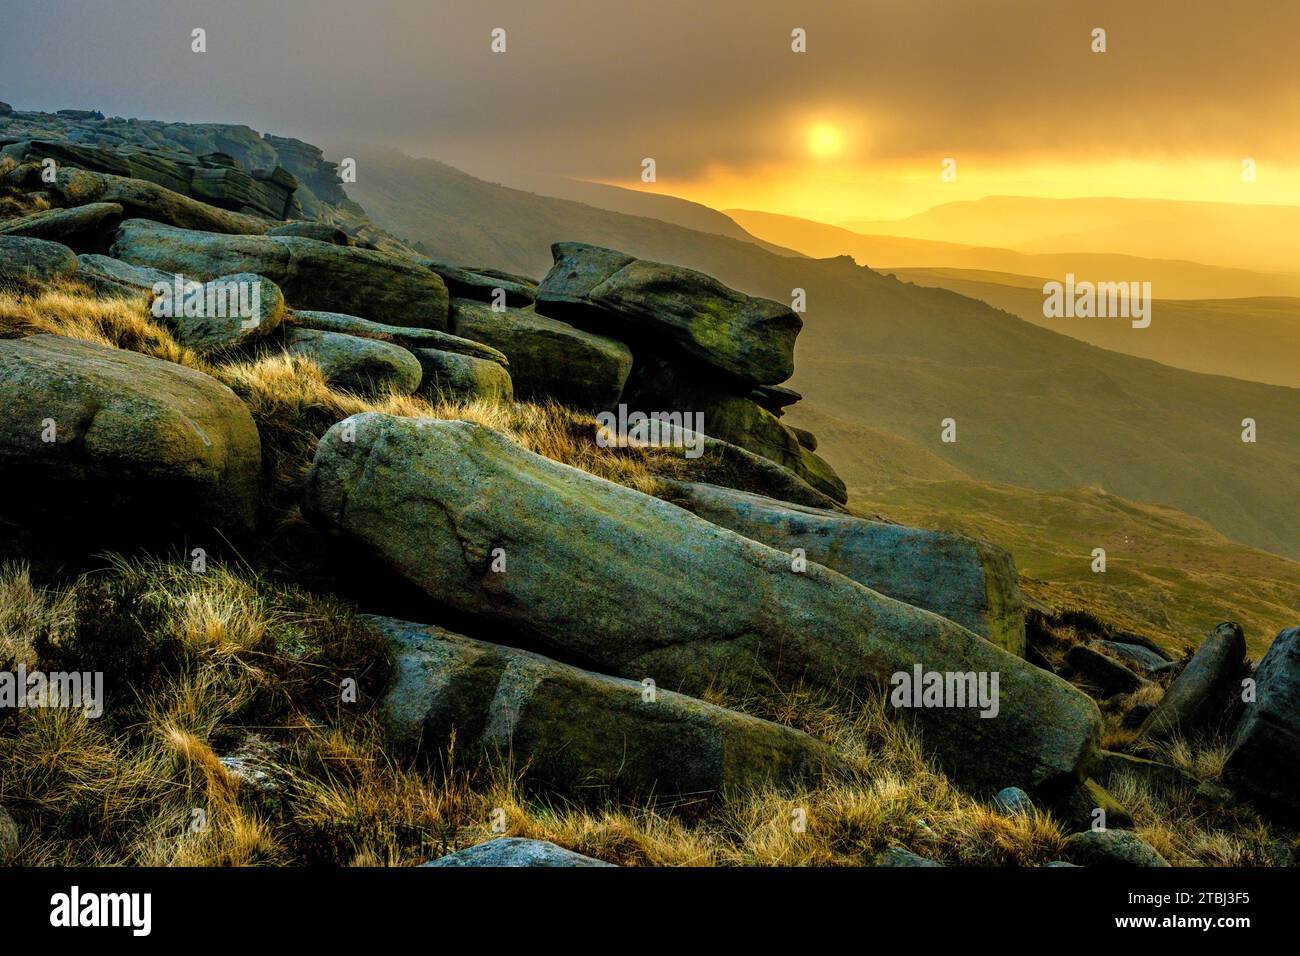 Misty, atmospheric conditions on the edges of Kinder Scout in the Peak District National Park, Derbyshire, UK Stock Photo